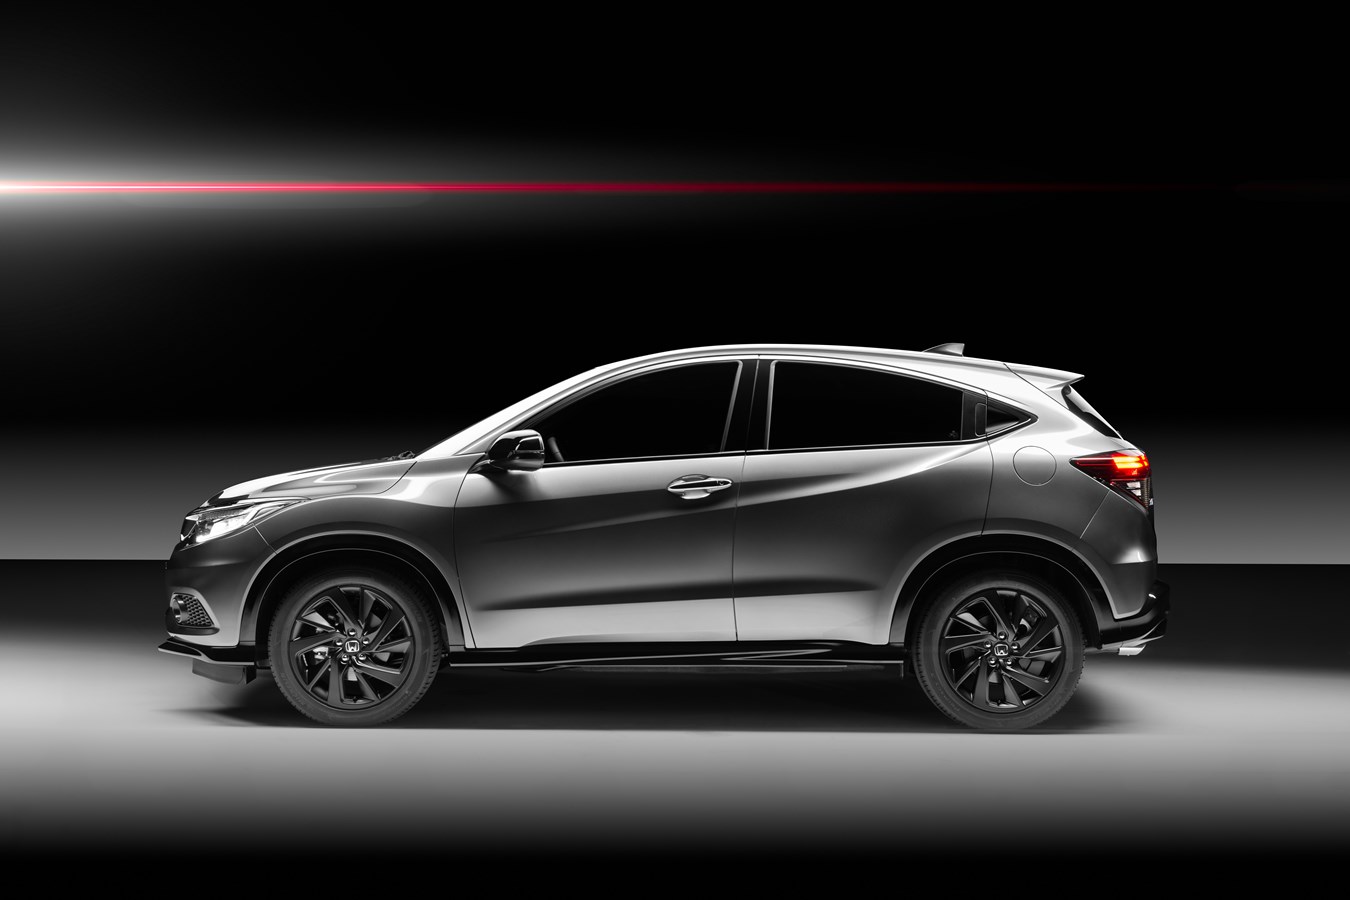 Side view of the HR-V 1.5 Sport